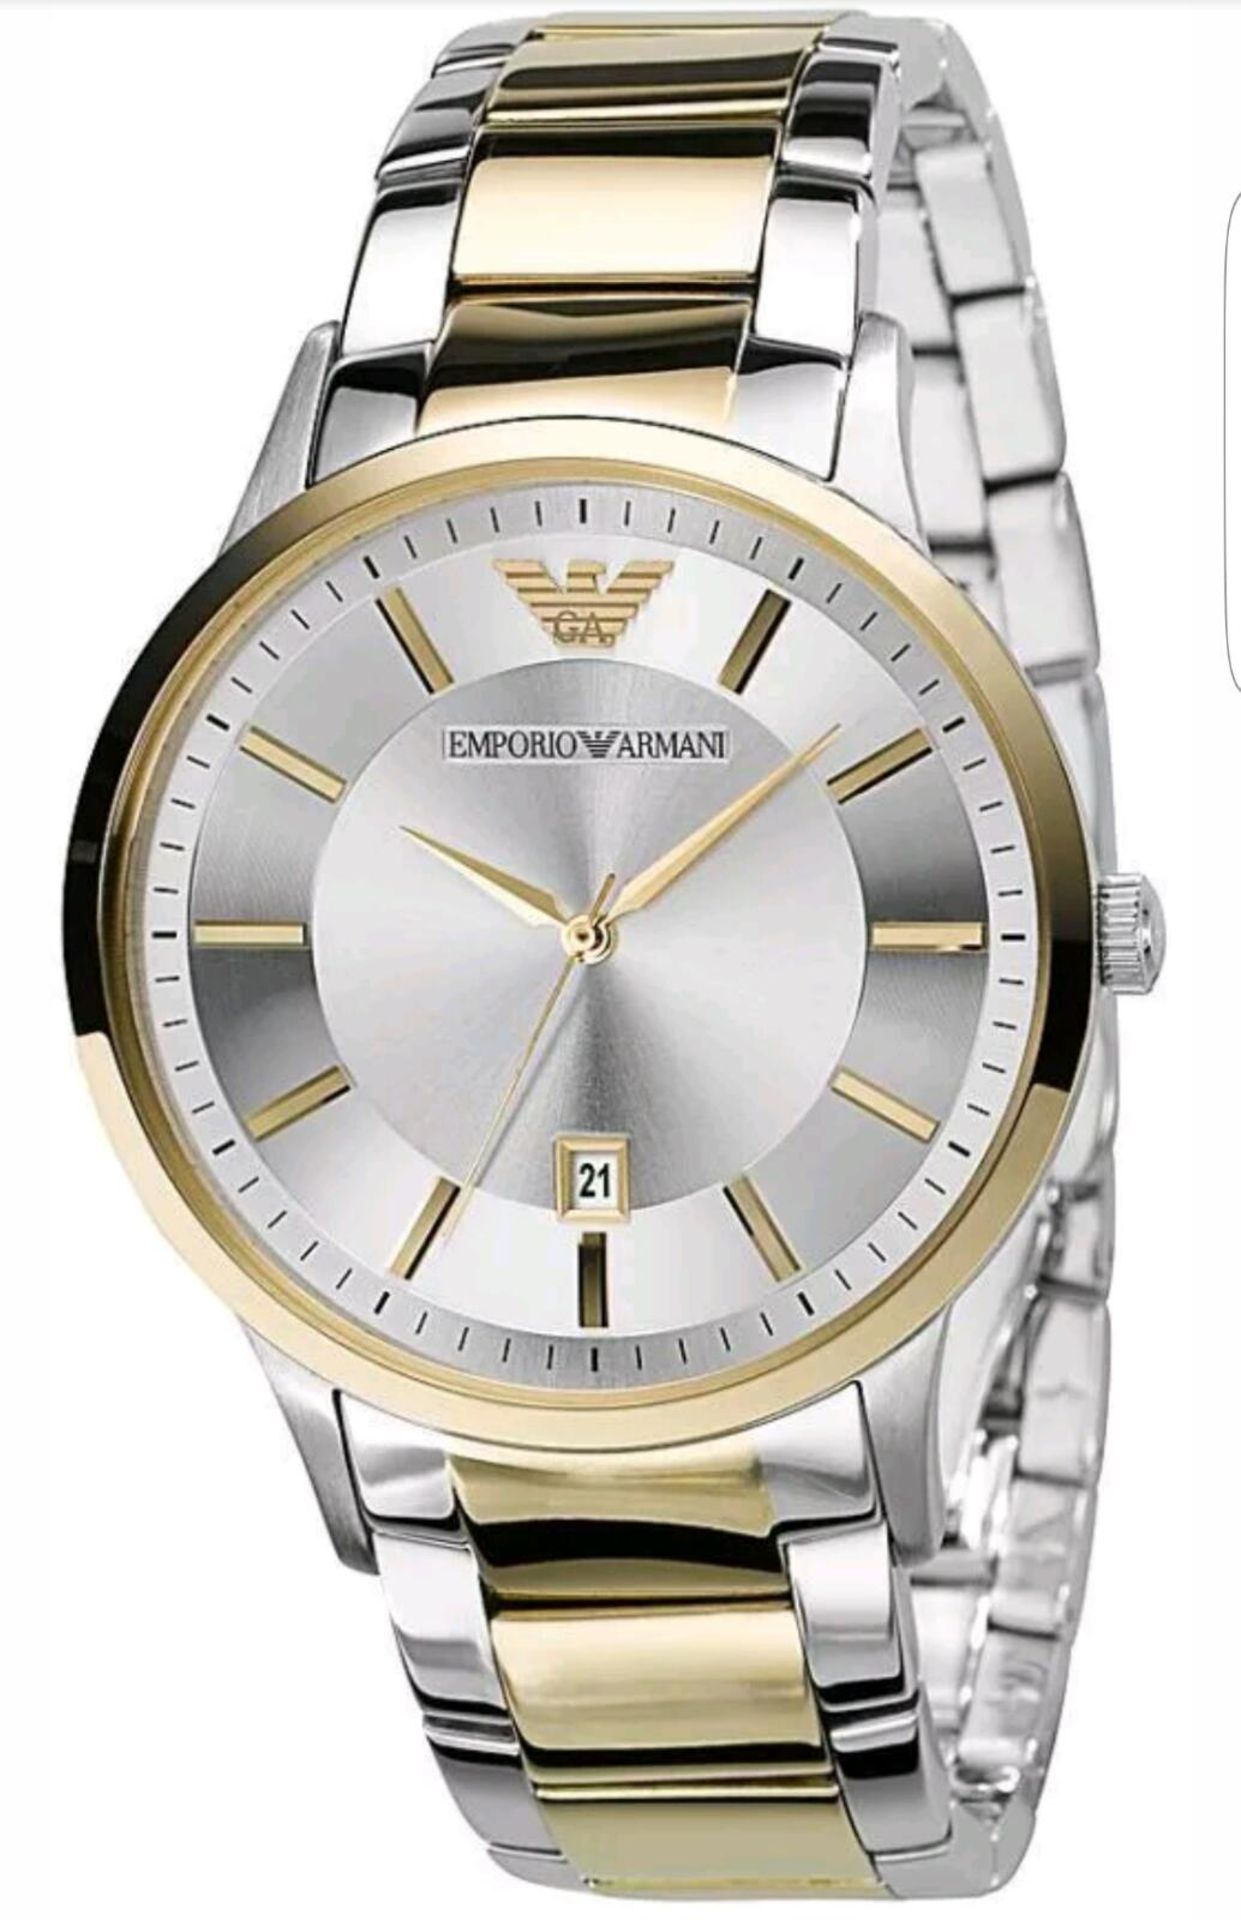 BRAND NEW EMPORIO ARMANI AR2449, GENT'S TWO TONE SILVER/ GOLD DESIGNER WATCH, COMPLETE WITH ORIGINAL